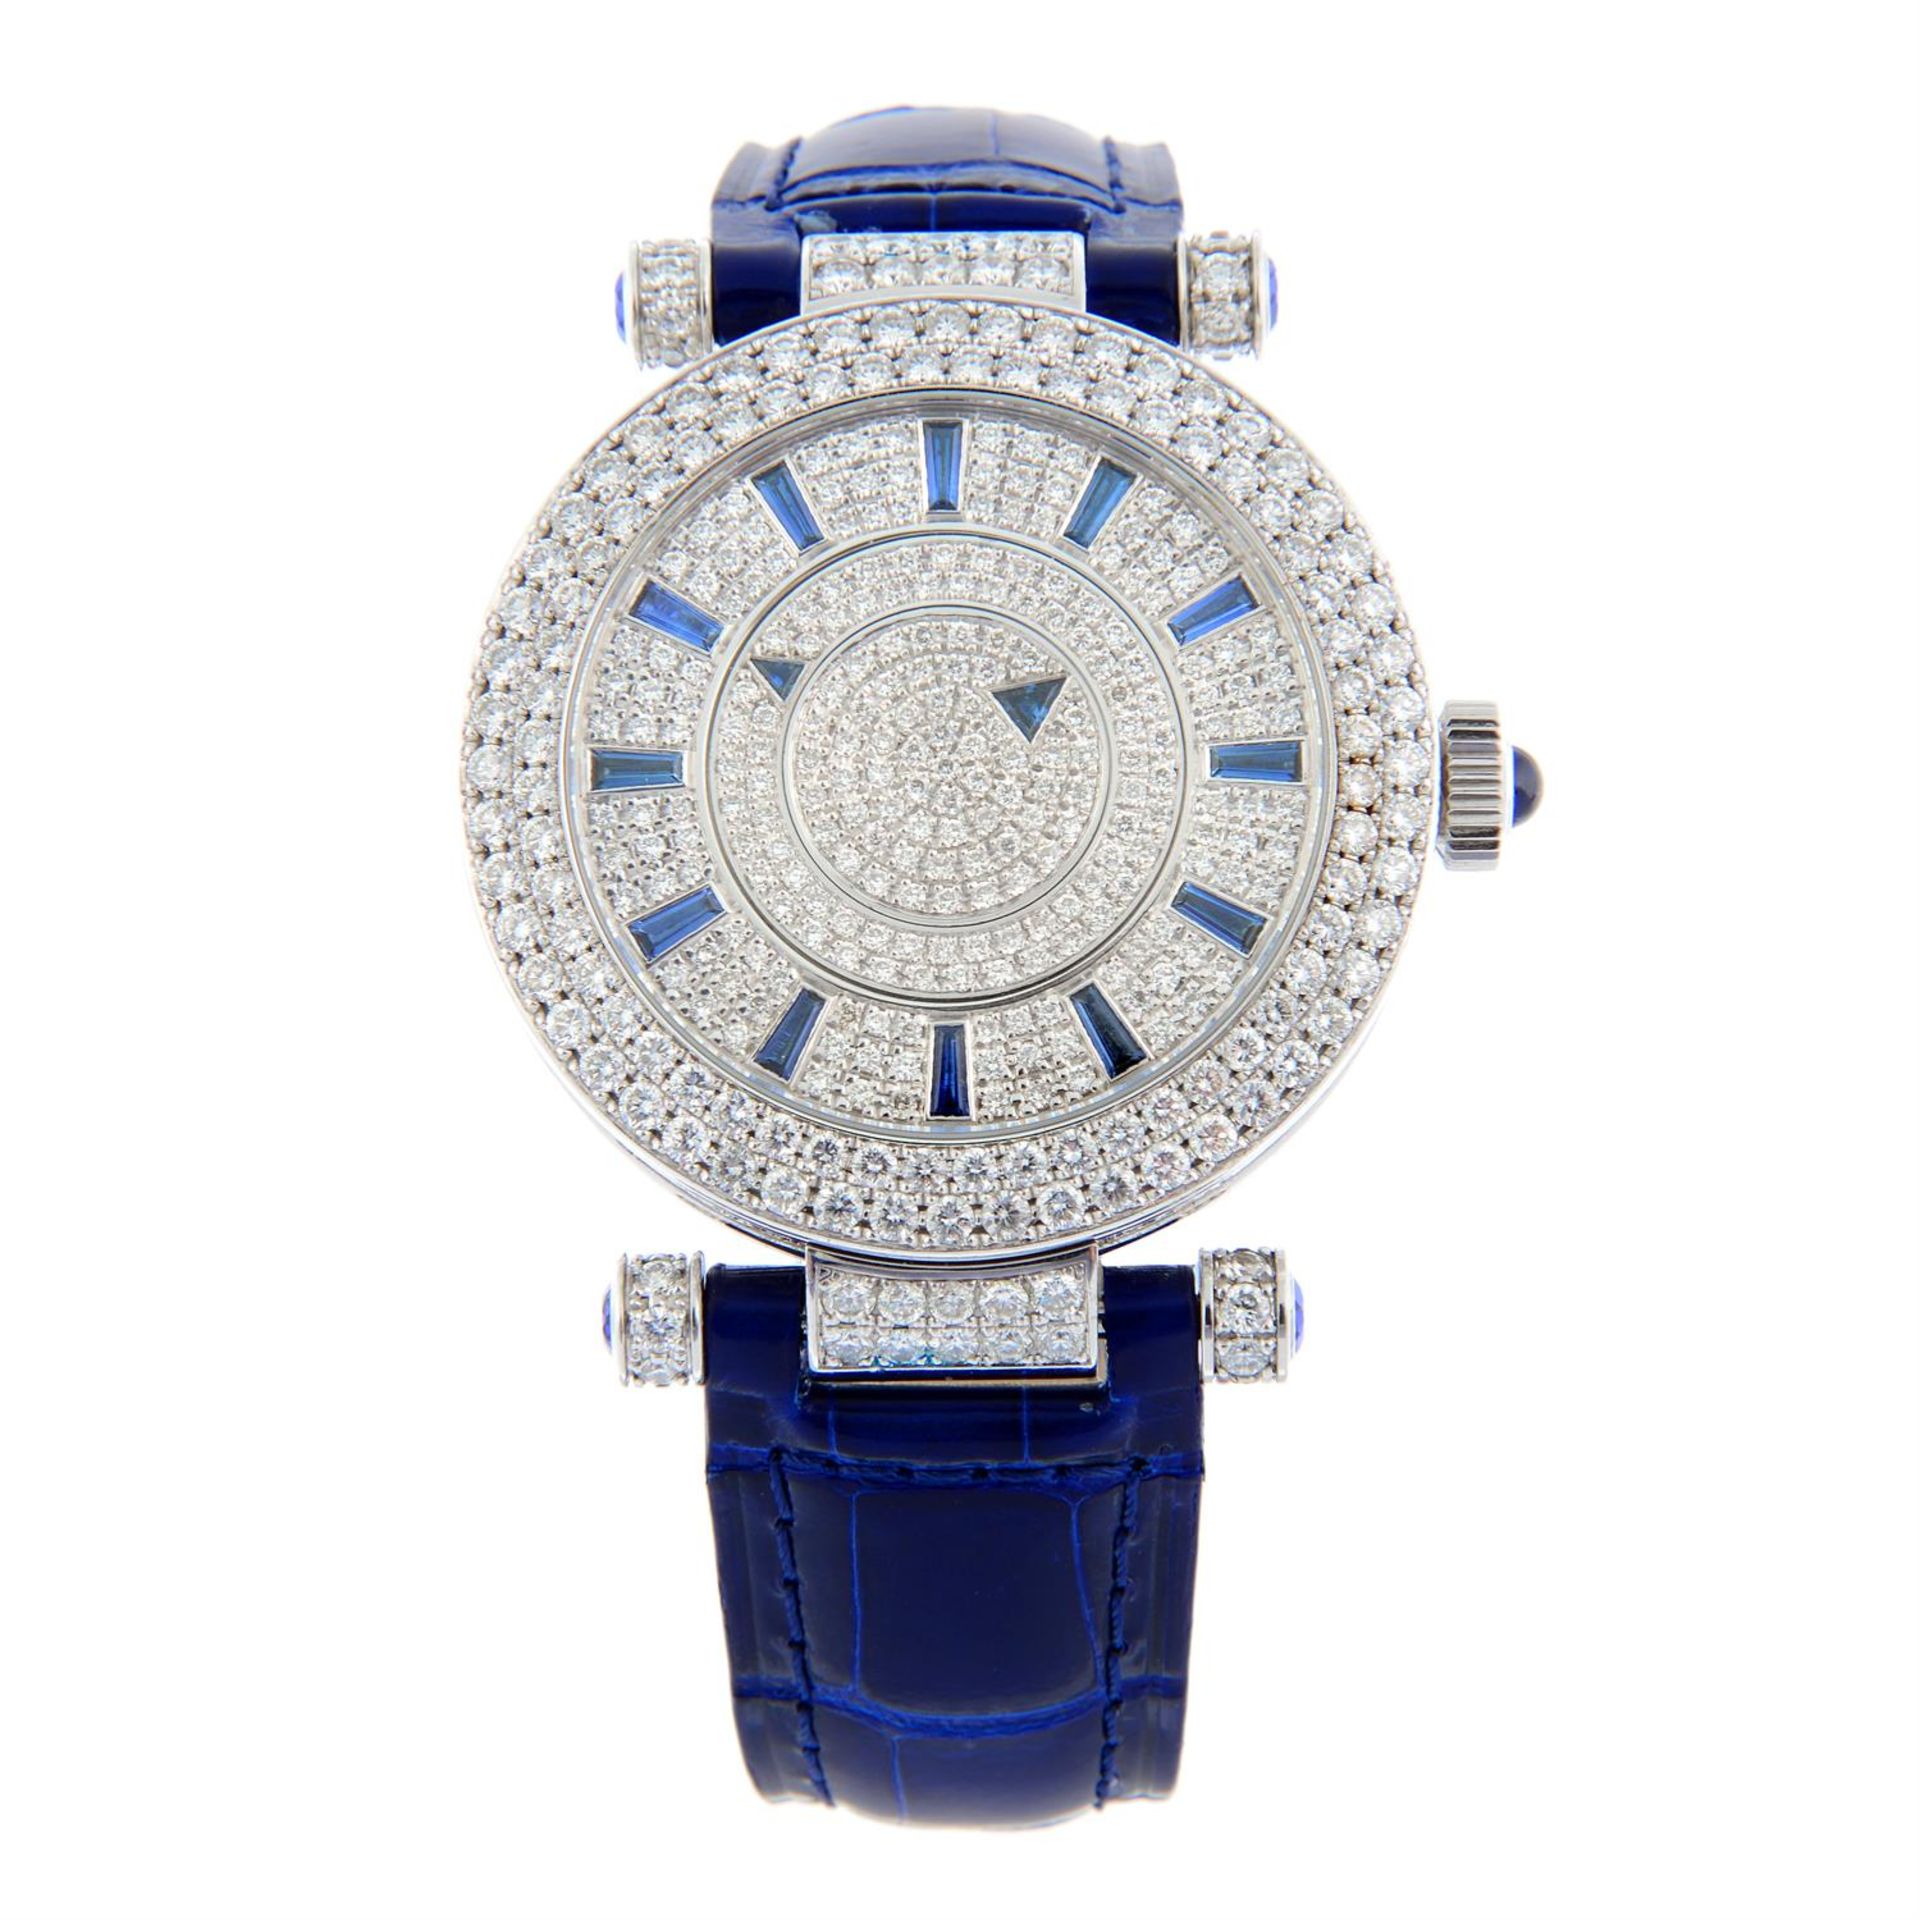 FRANCK MULLER - a factory diamond set 18ct white gold Double Mystery wrist watch, 39mm.